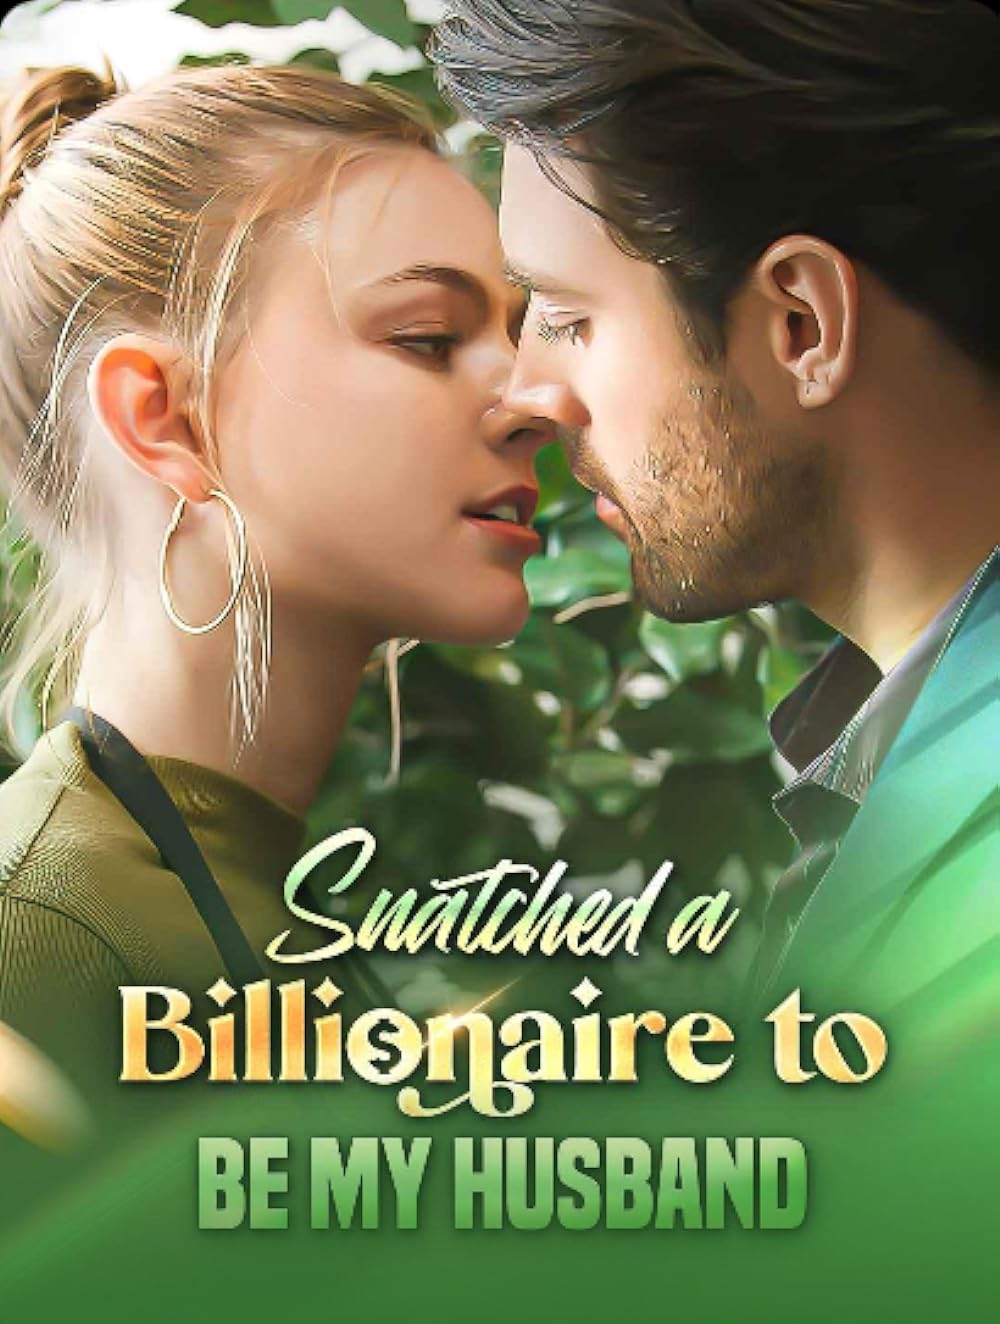 Snatched a Billionaire to be My Husband - Full Drama Episodes for free